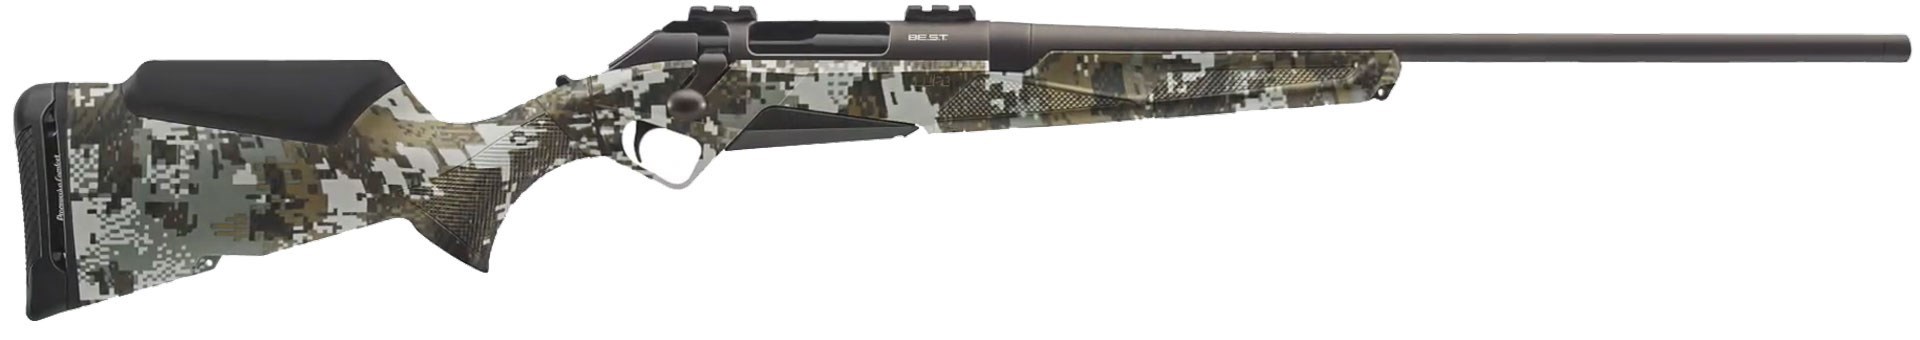 Benelli BE.S.T. Lupo bolt action rifle.